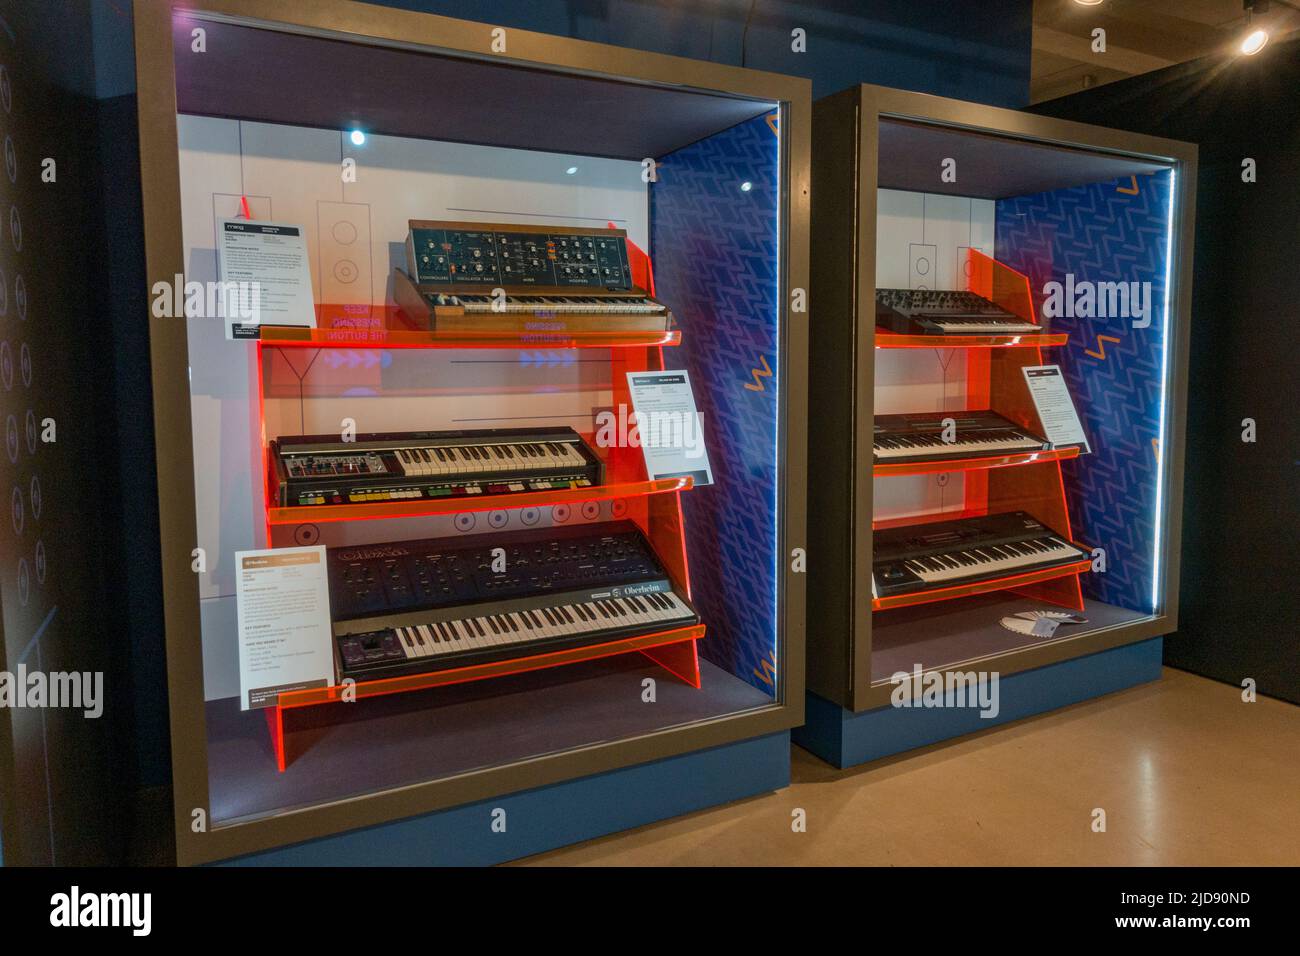 General display of electronic keyboards (synthesizer) on display in a media museum. Stock Photo